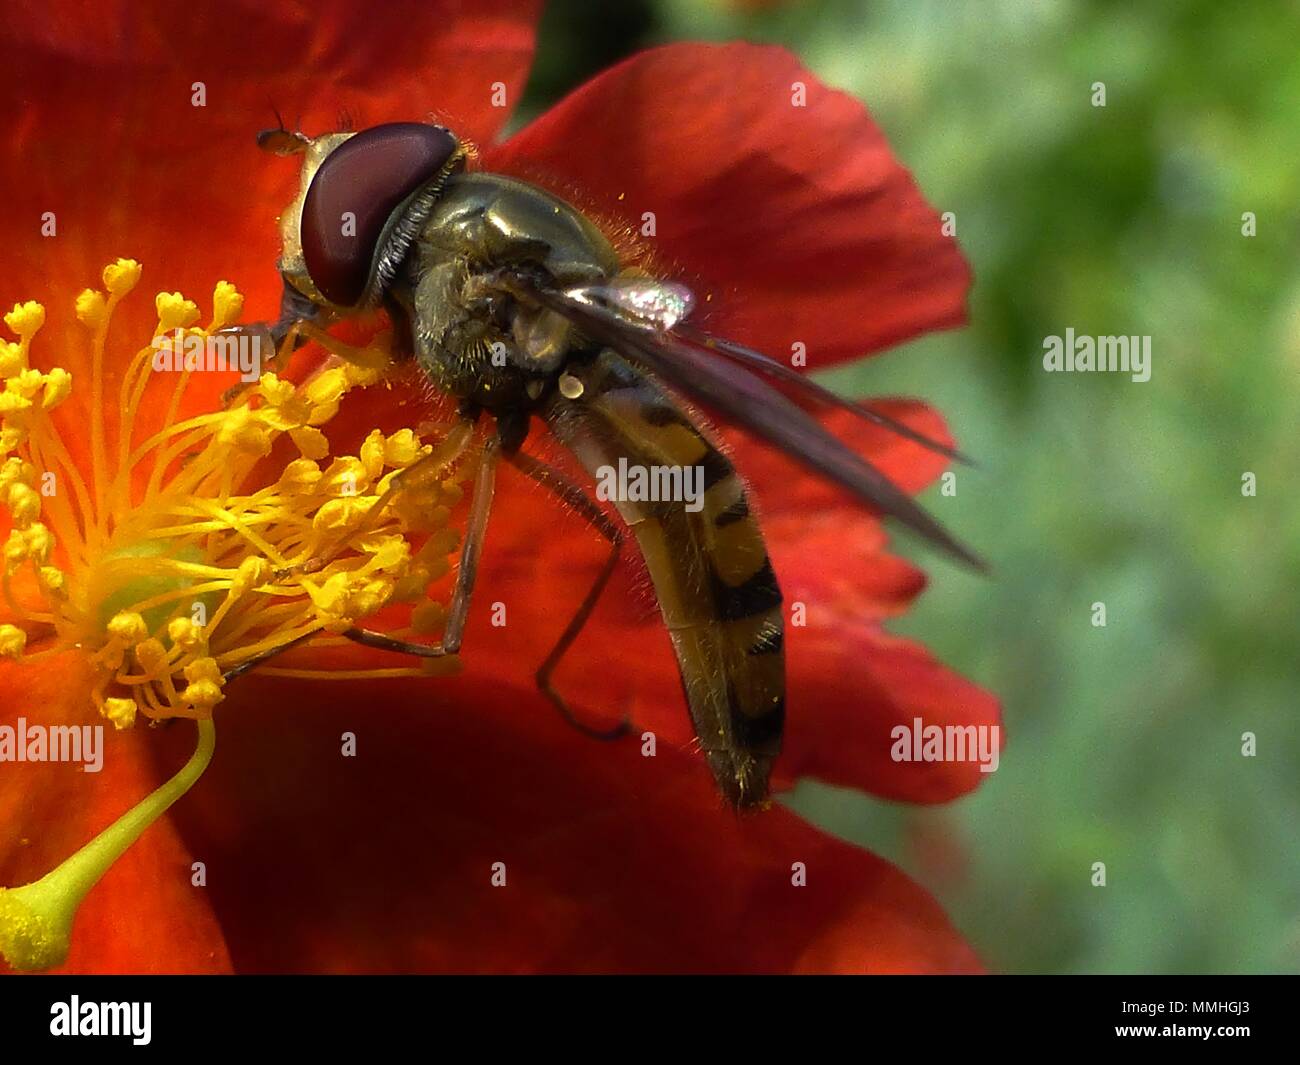 Hover fly on delicate red border flower red (Helianthemum) Rock/Sun rose yellow stamens (Cistaceae) macro close up Stock Photo